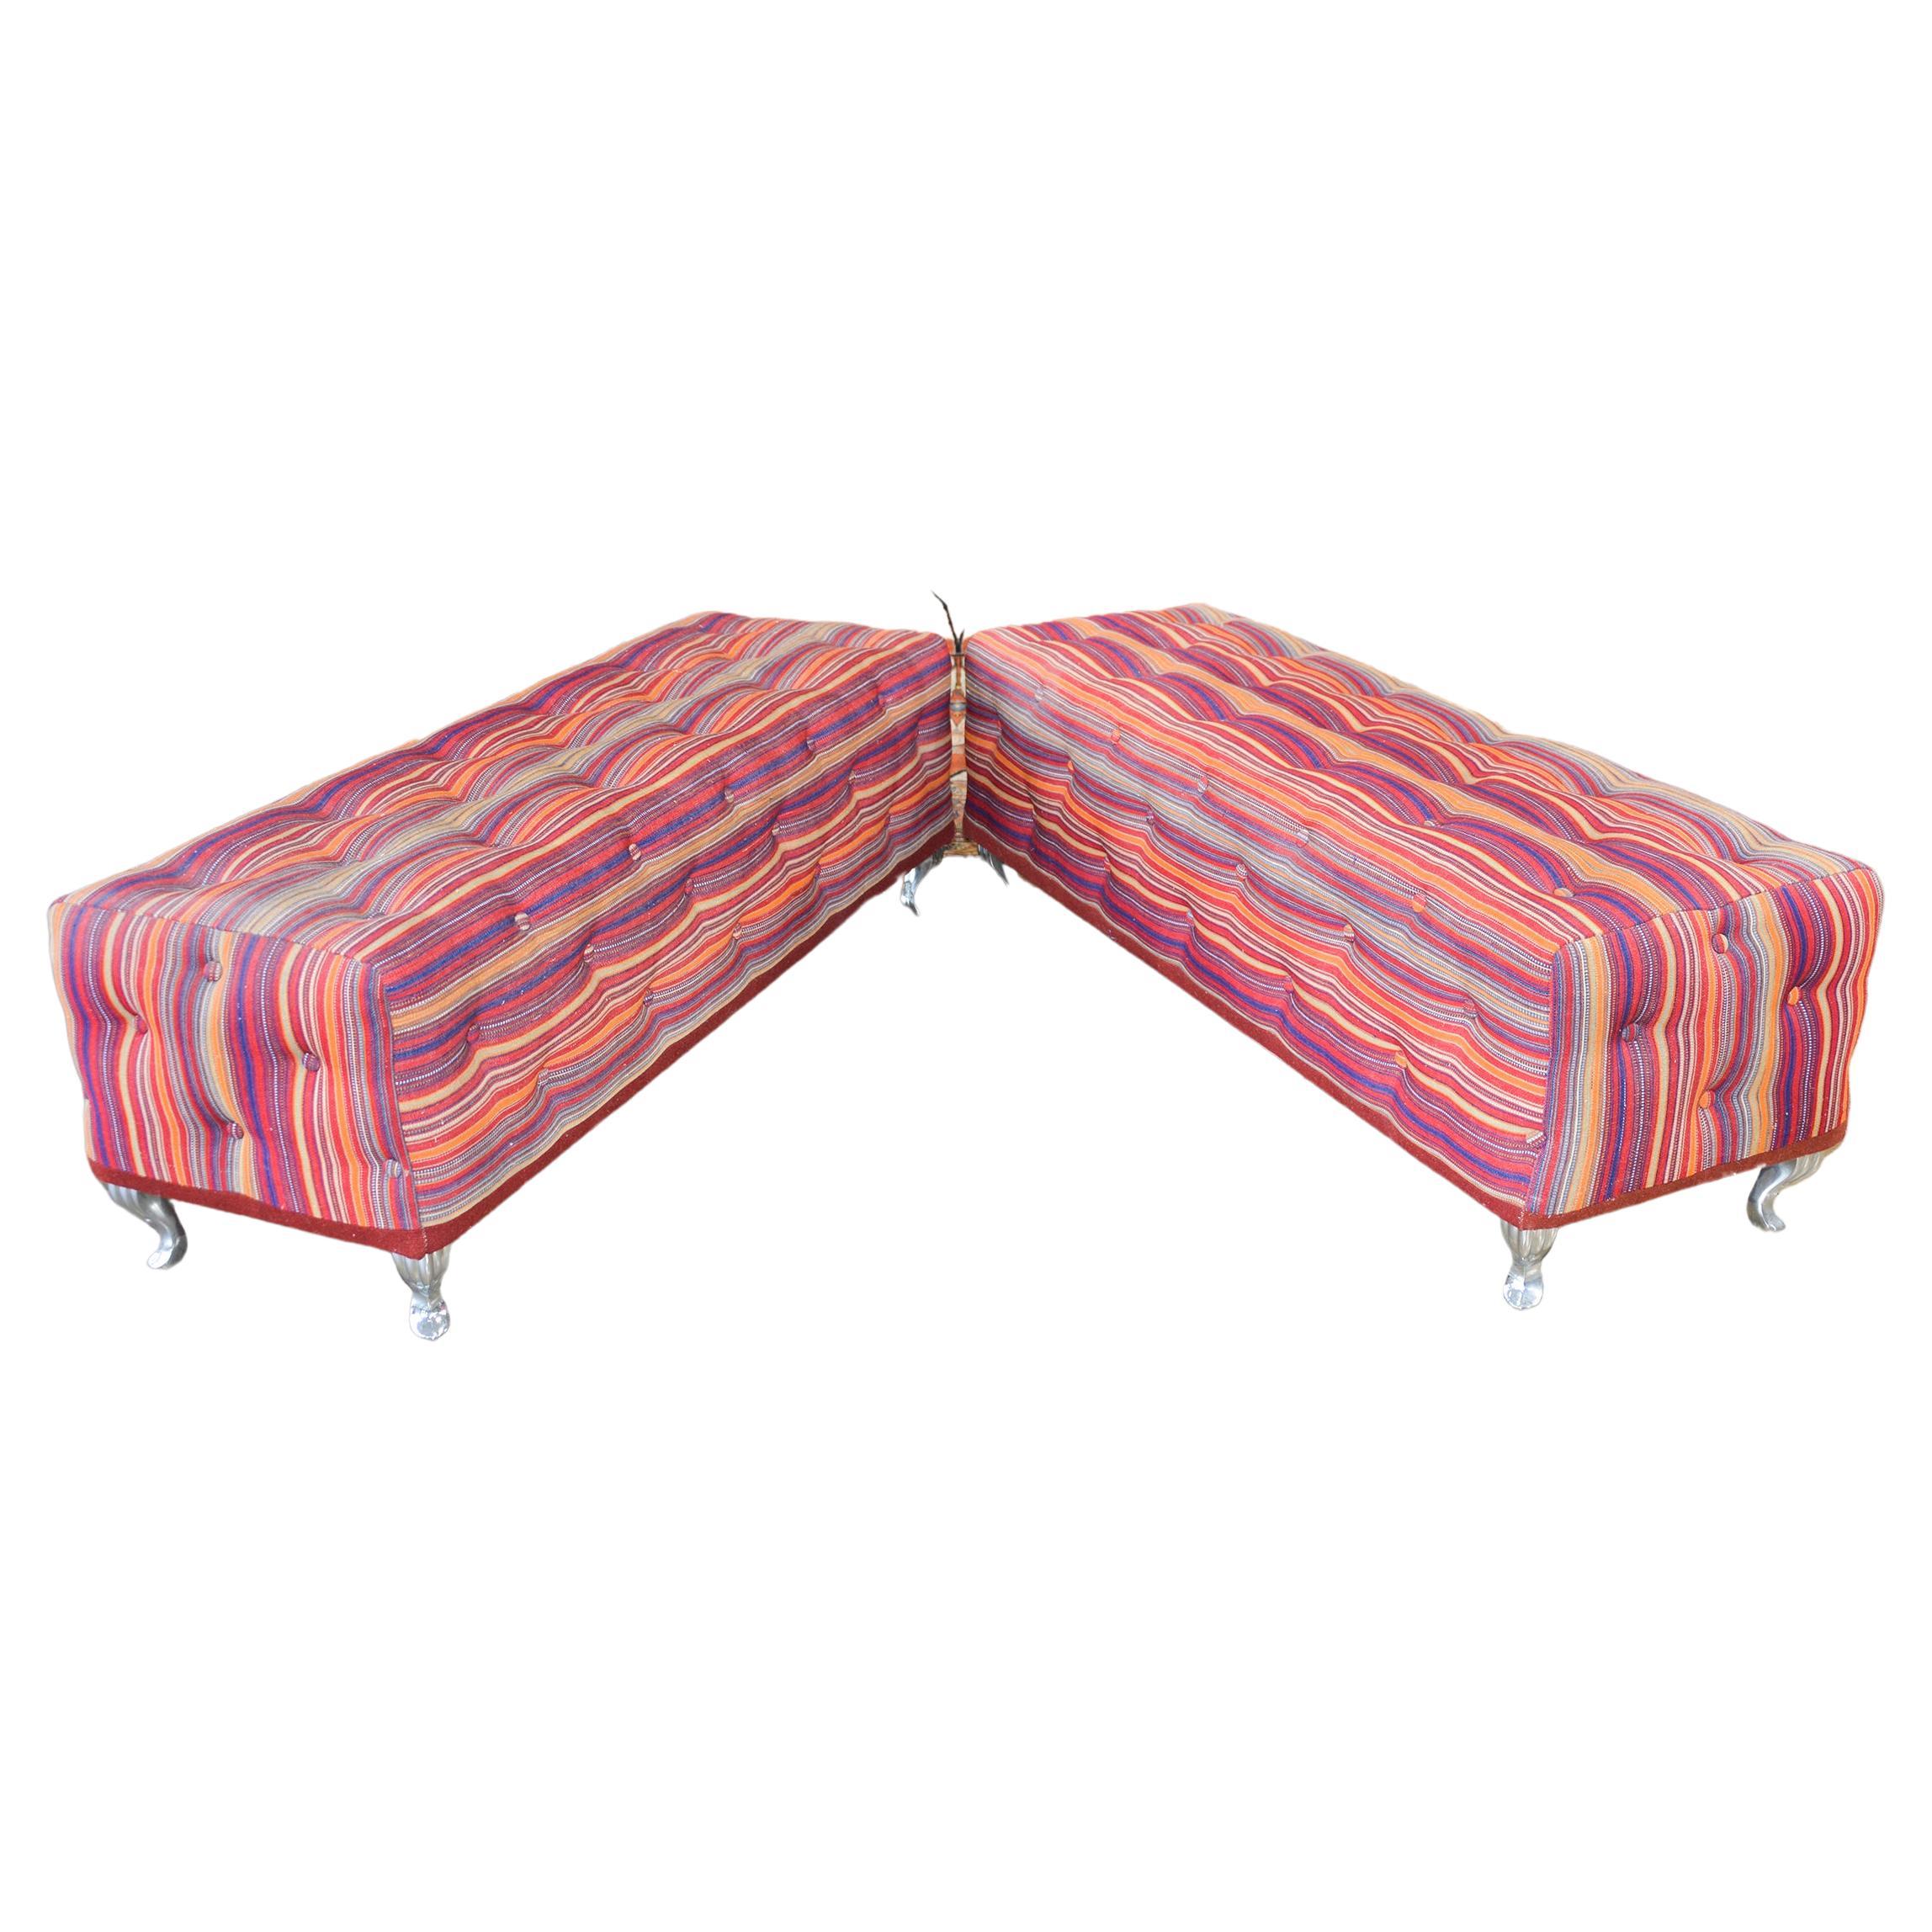 Pair of Benches Covered in Vintage Jajim Kilim Rugs